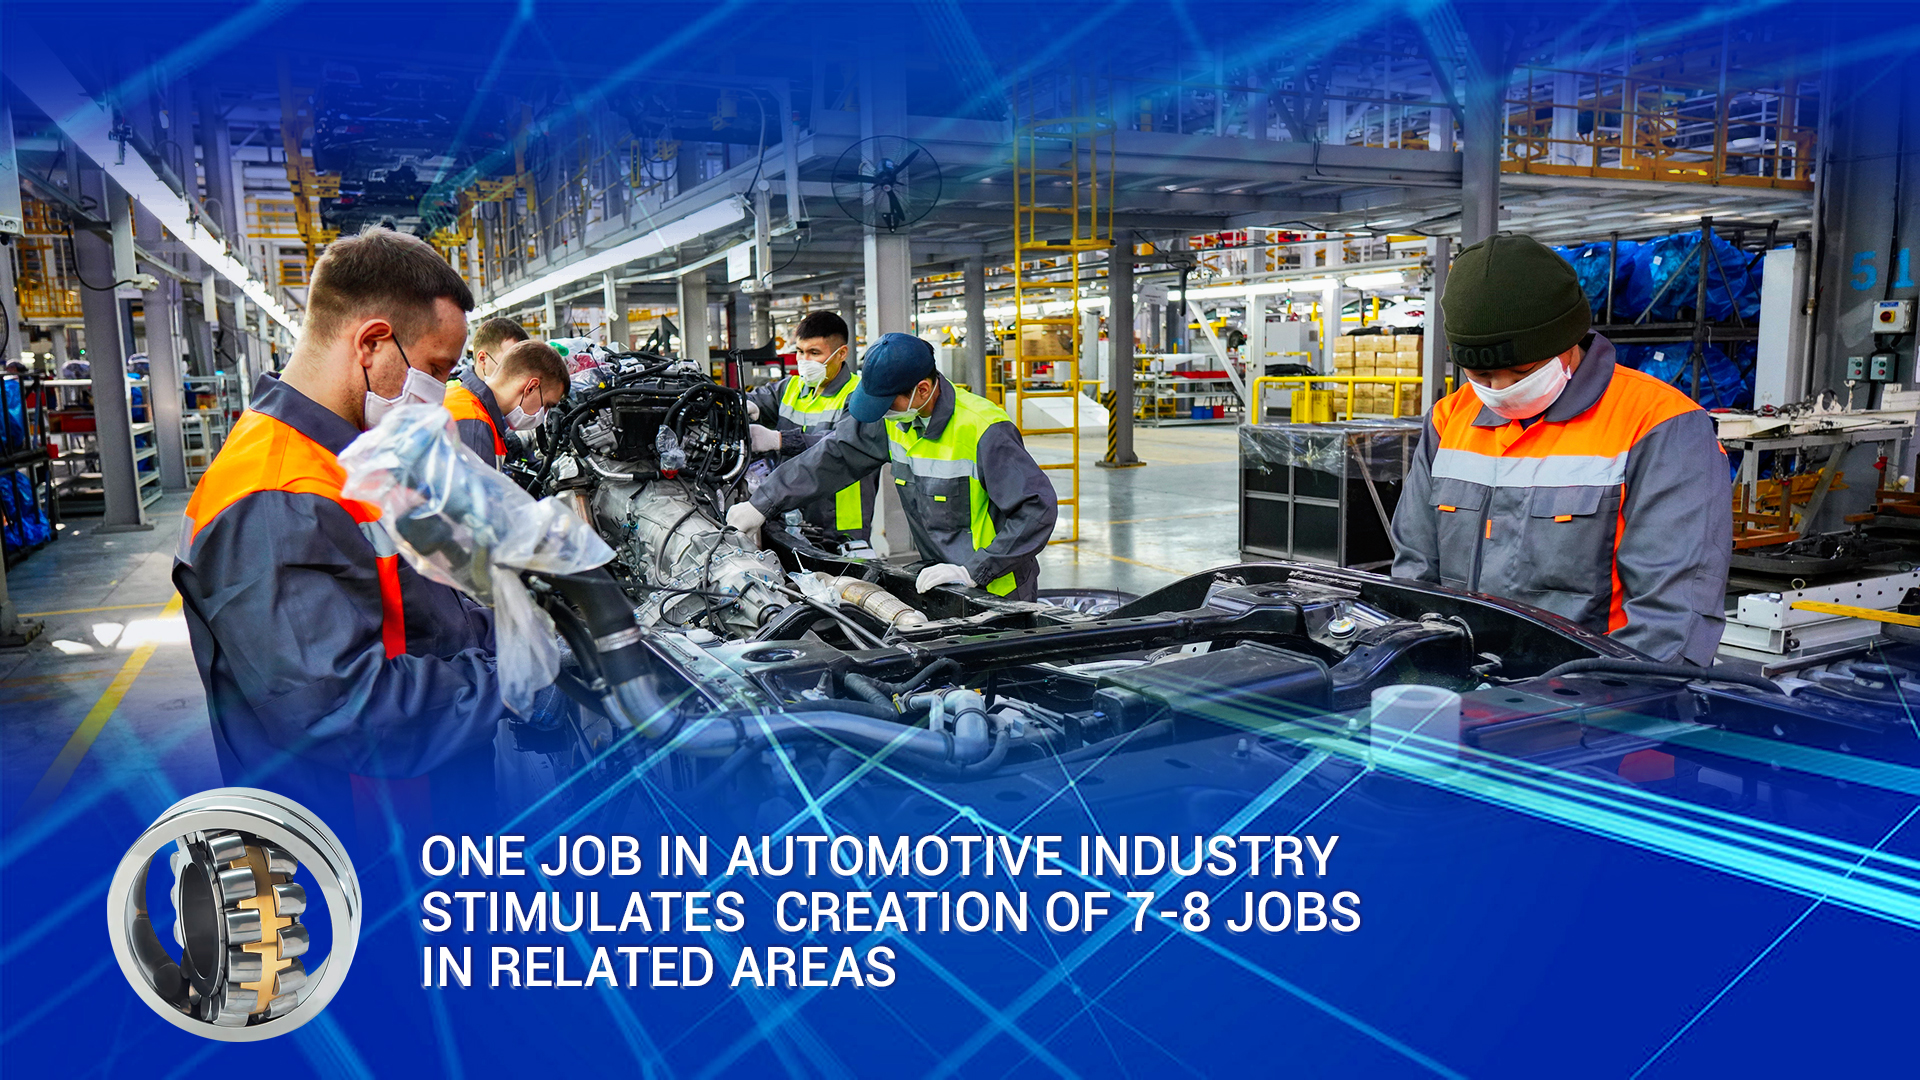 One job in automotive industry stimulates creation of 7-8 jobs in related areas